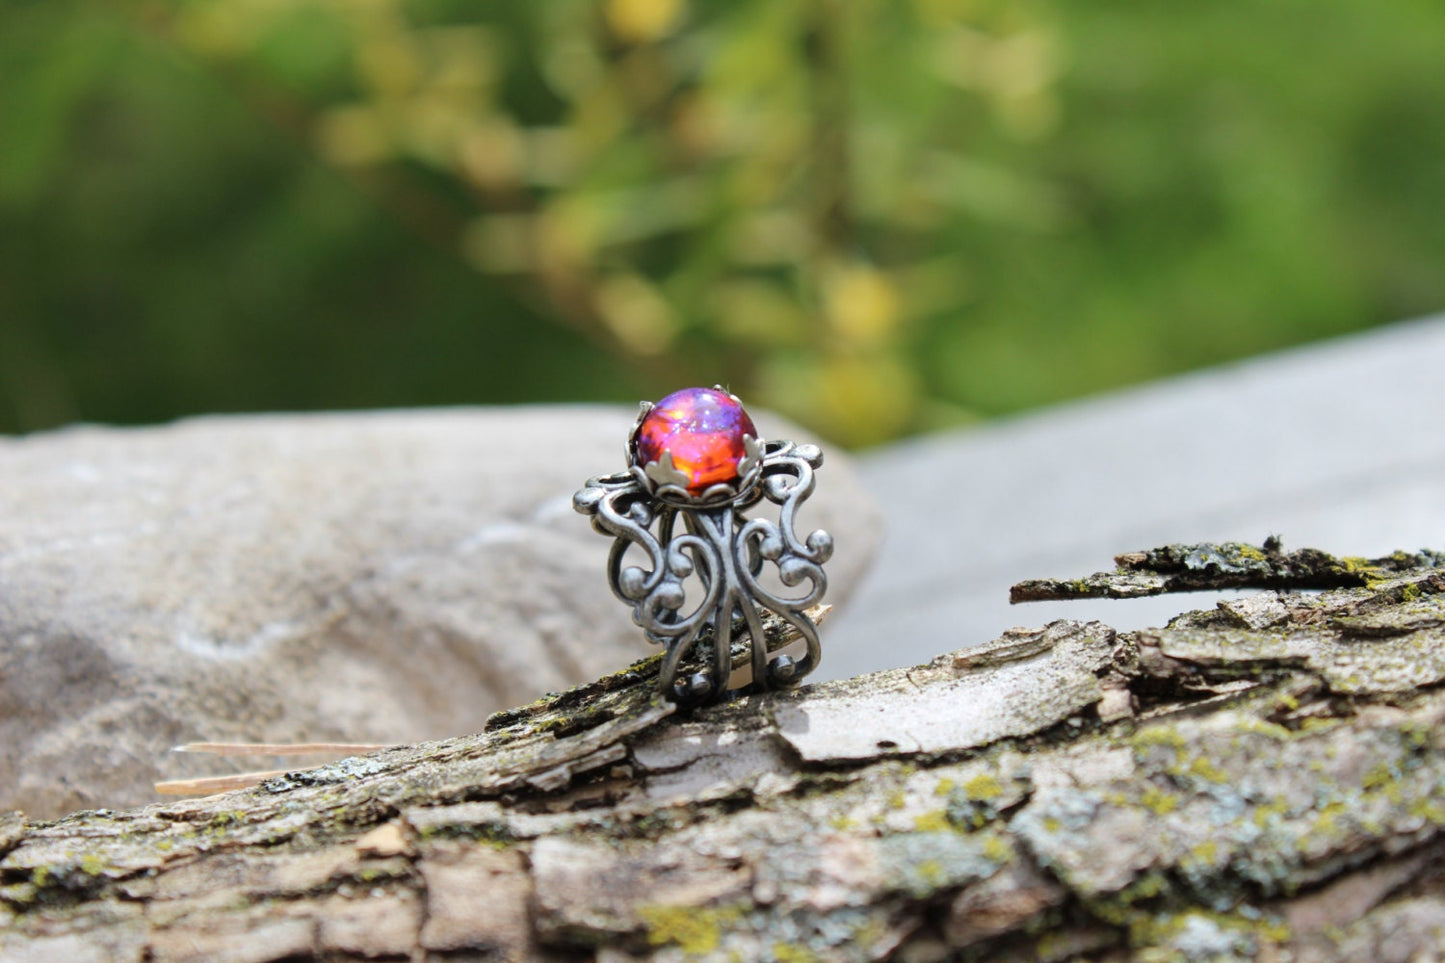 Dragon's Breath Earrings, Dragon's Breath Ring, Opal Ring, Opal Earrings, Mexican Fire Opal Ring, Fire And Lace, Summer gifts, Free Ship